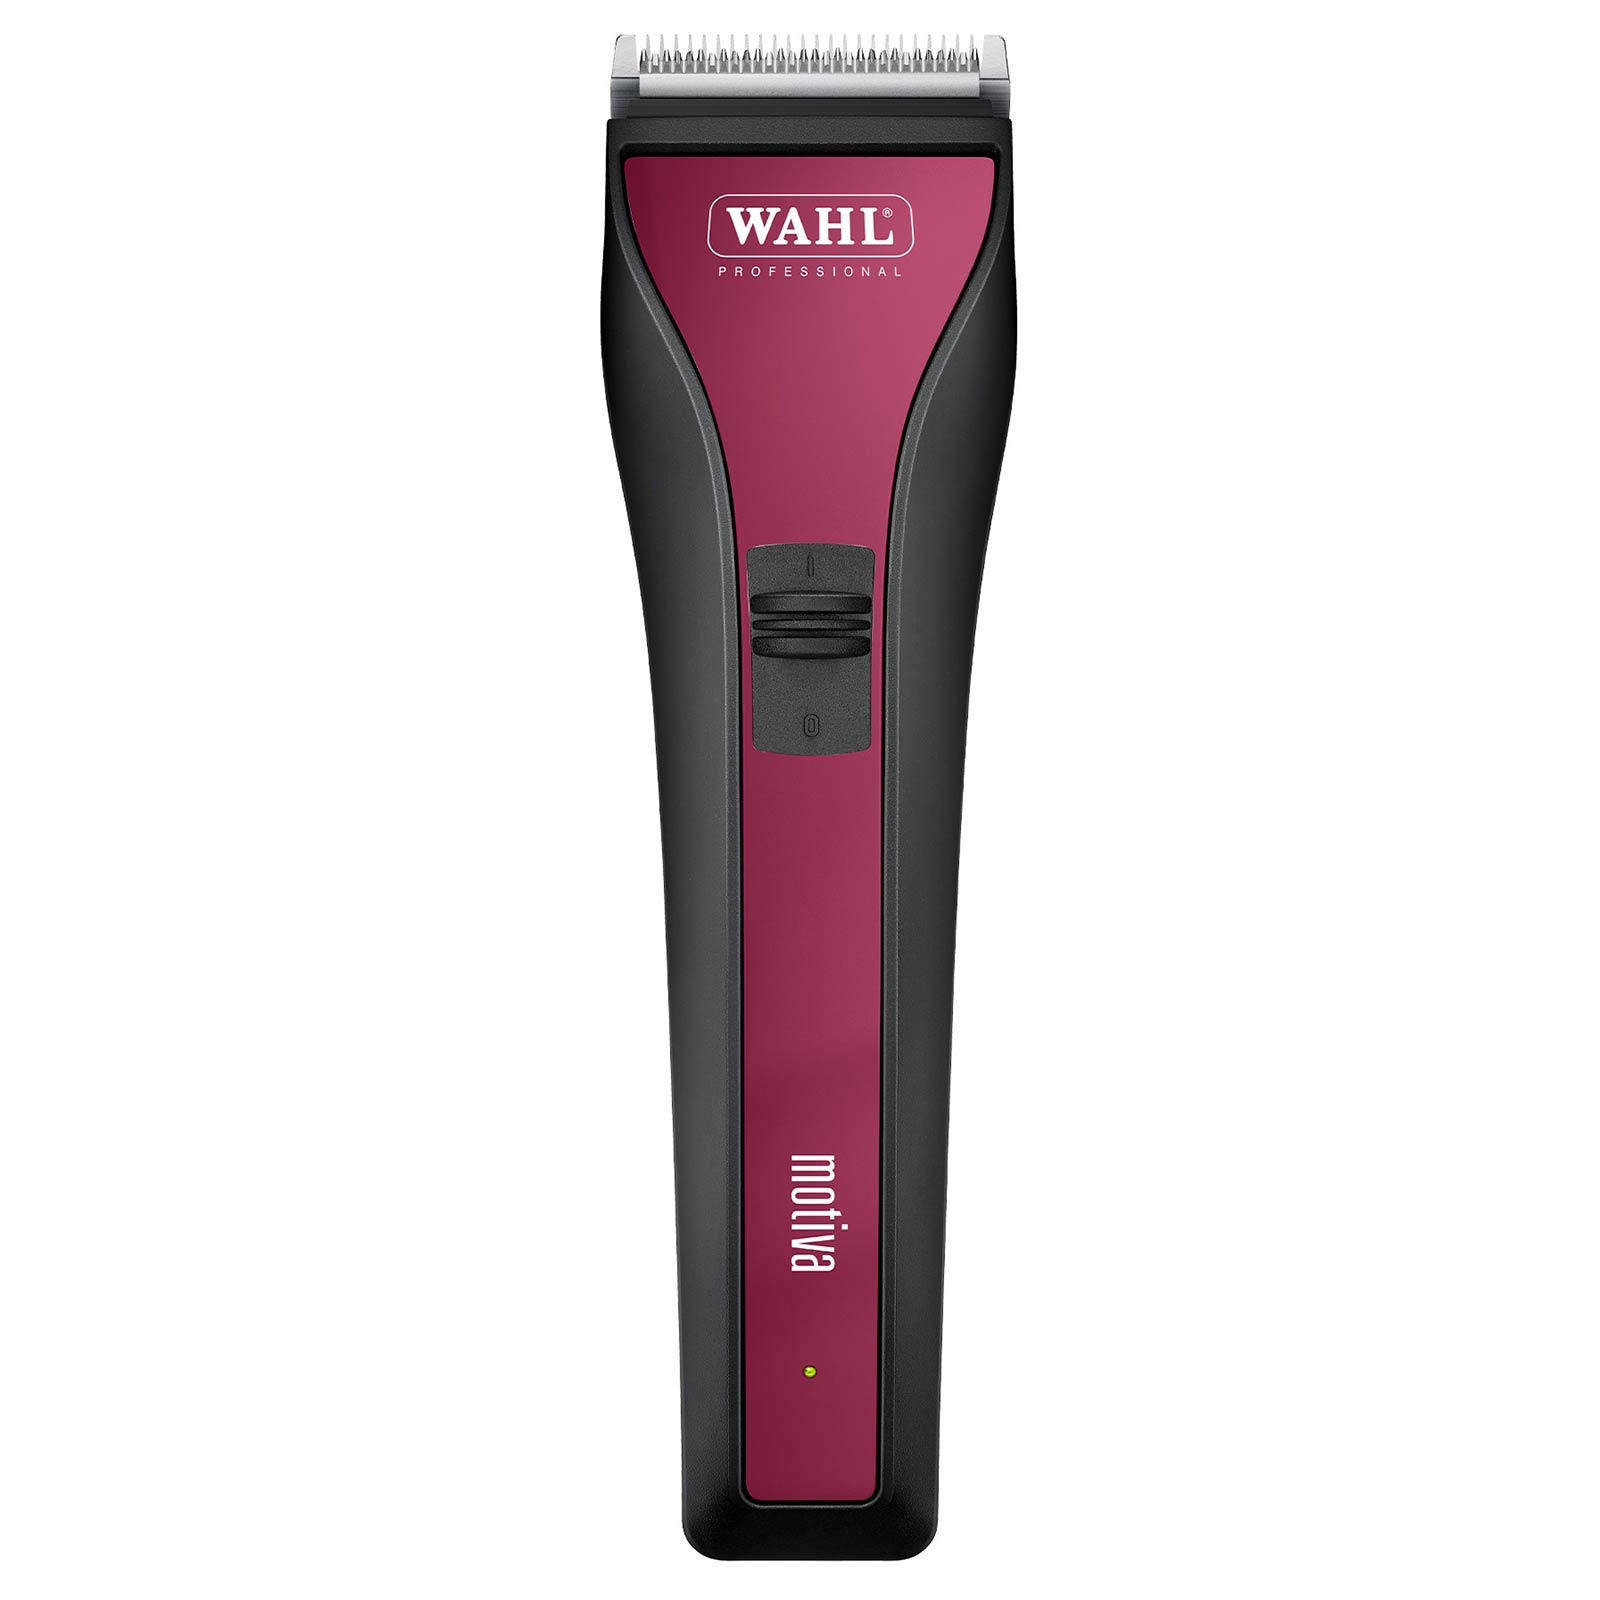 Clipper Blade Oiling, How to properly oil your Wahl clipper blades. How  often do you oil your tools?, By Wahl Professional USA